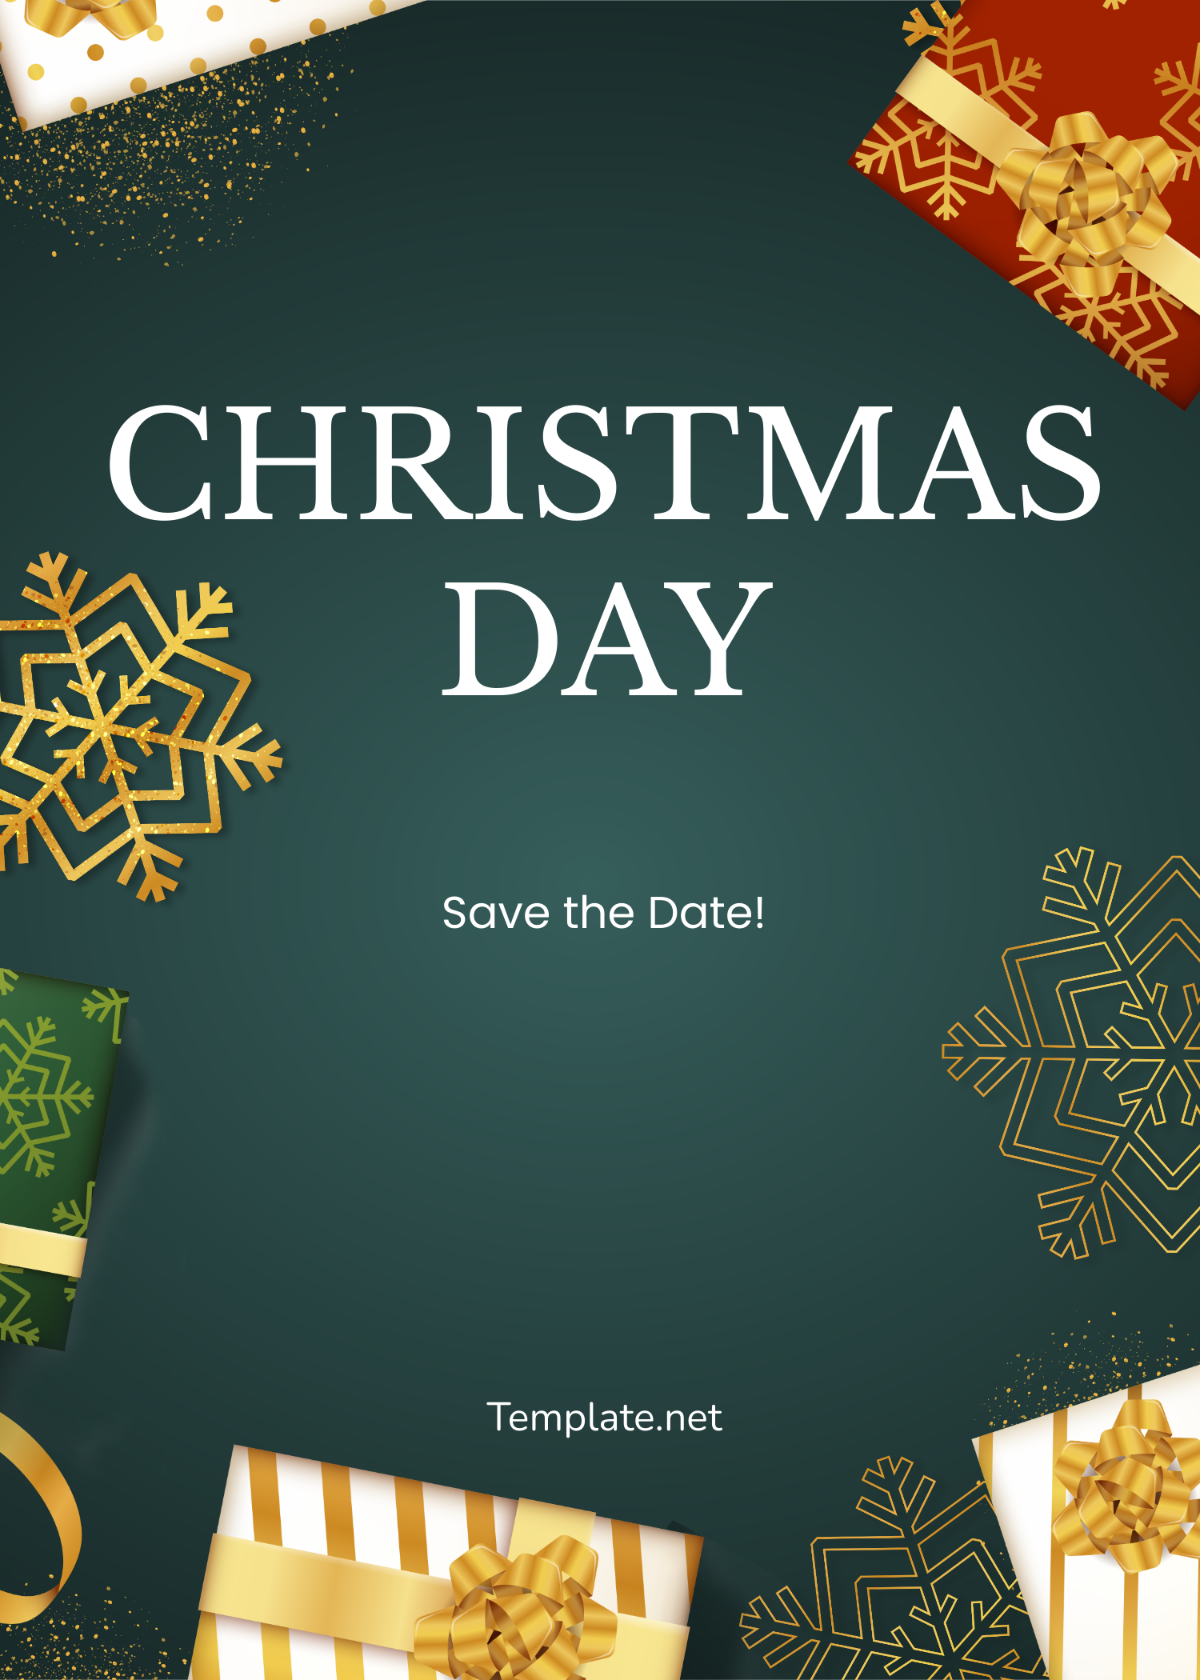 Free Save the Date Christmas Invitation Template